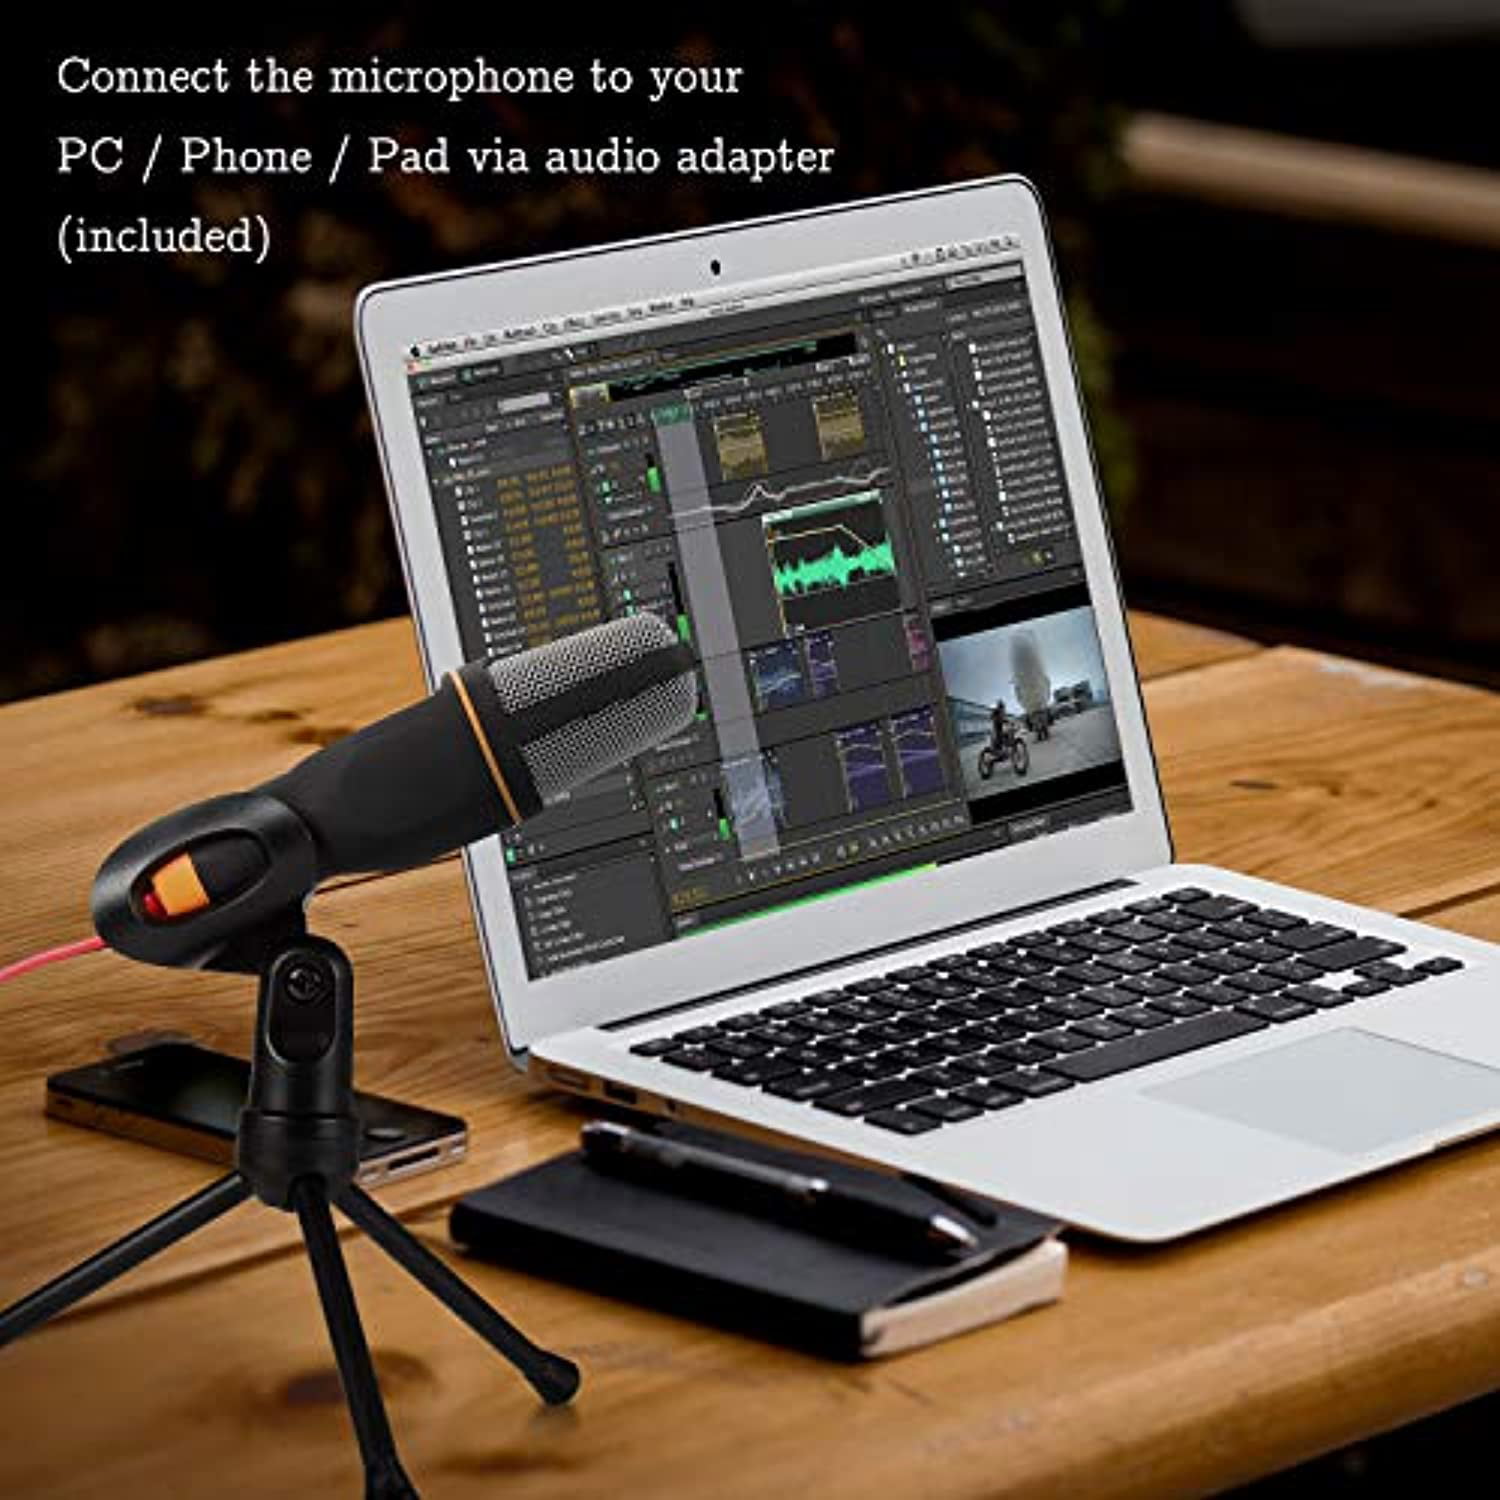 Professional 3.5mm Jack Recording Condenser Microphone Compatible with PC Mac-Recorder Singing YouTube Skype Gaming Laptop iUKUS PC Microphone with Mic Stand 3.5mm PC Microphone iPhone iPad 